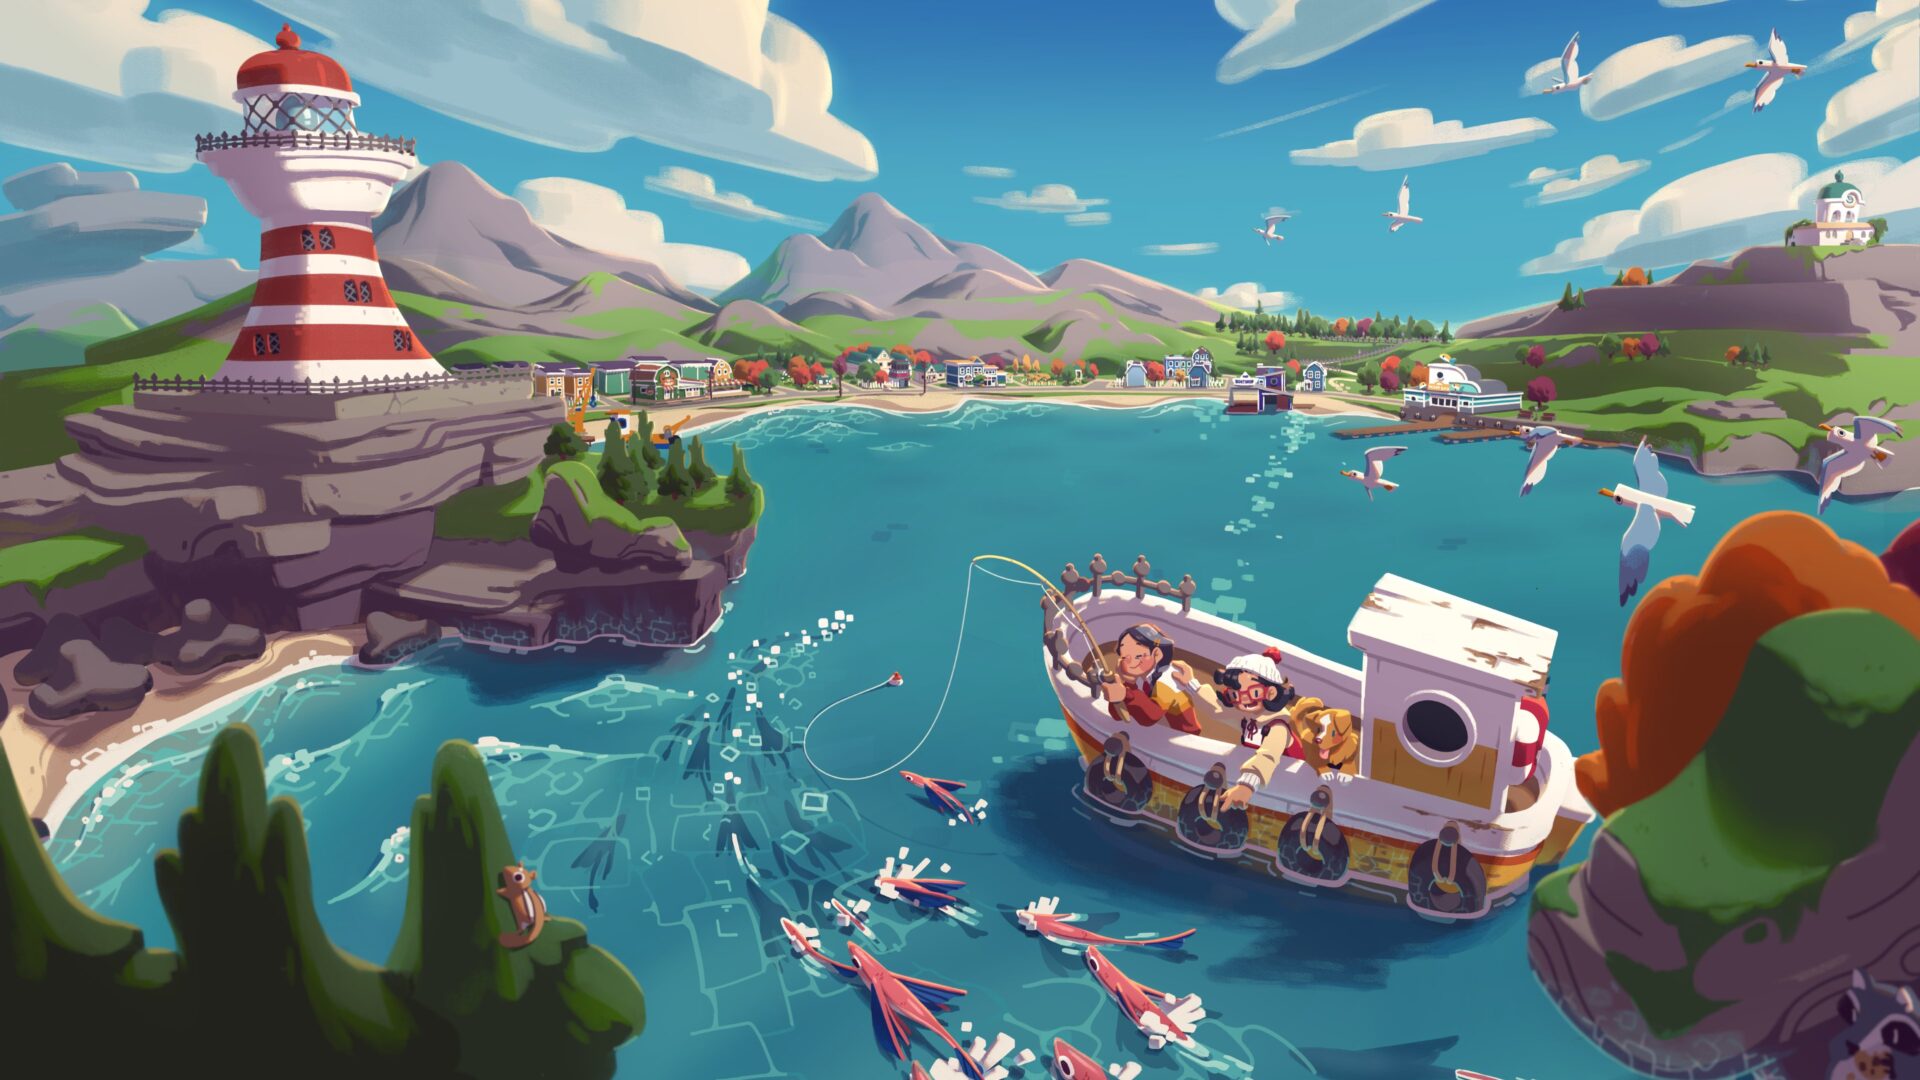 Moonglow Bay Was Inspired by Animal Crossing, Harvest Moon, Manga, and Anime